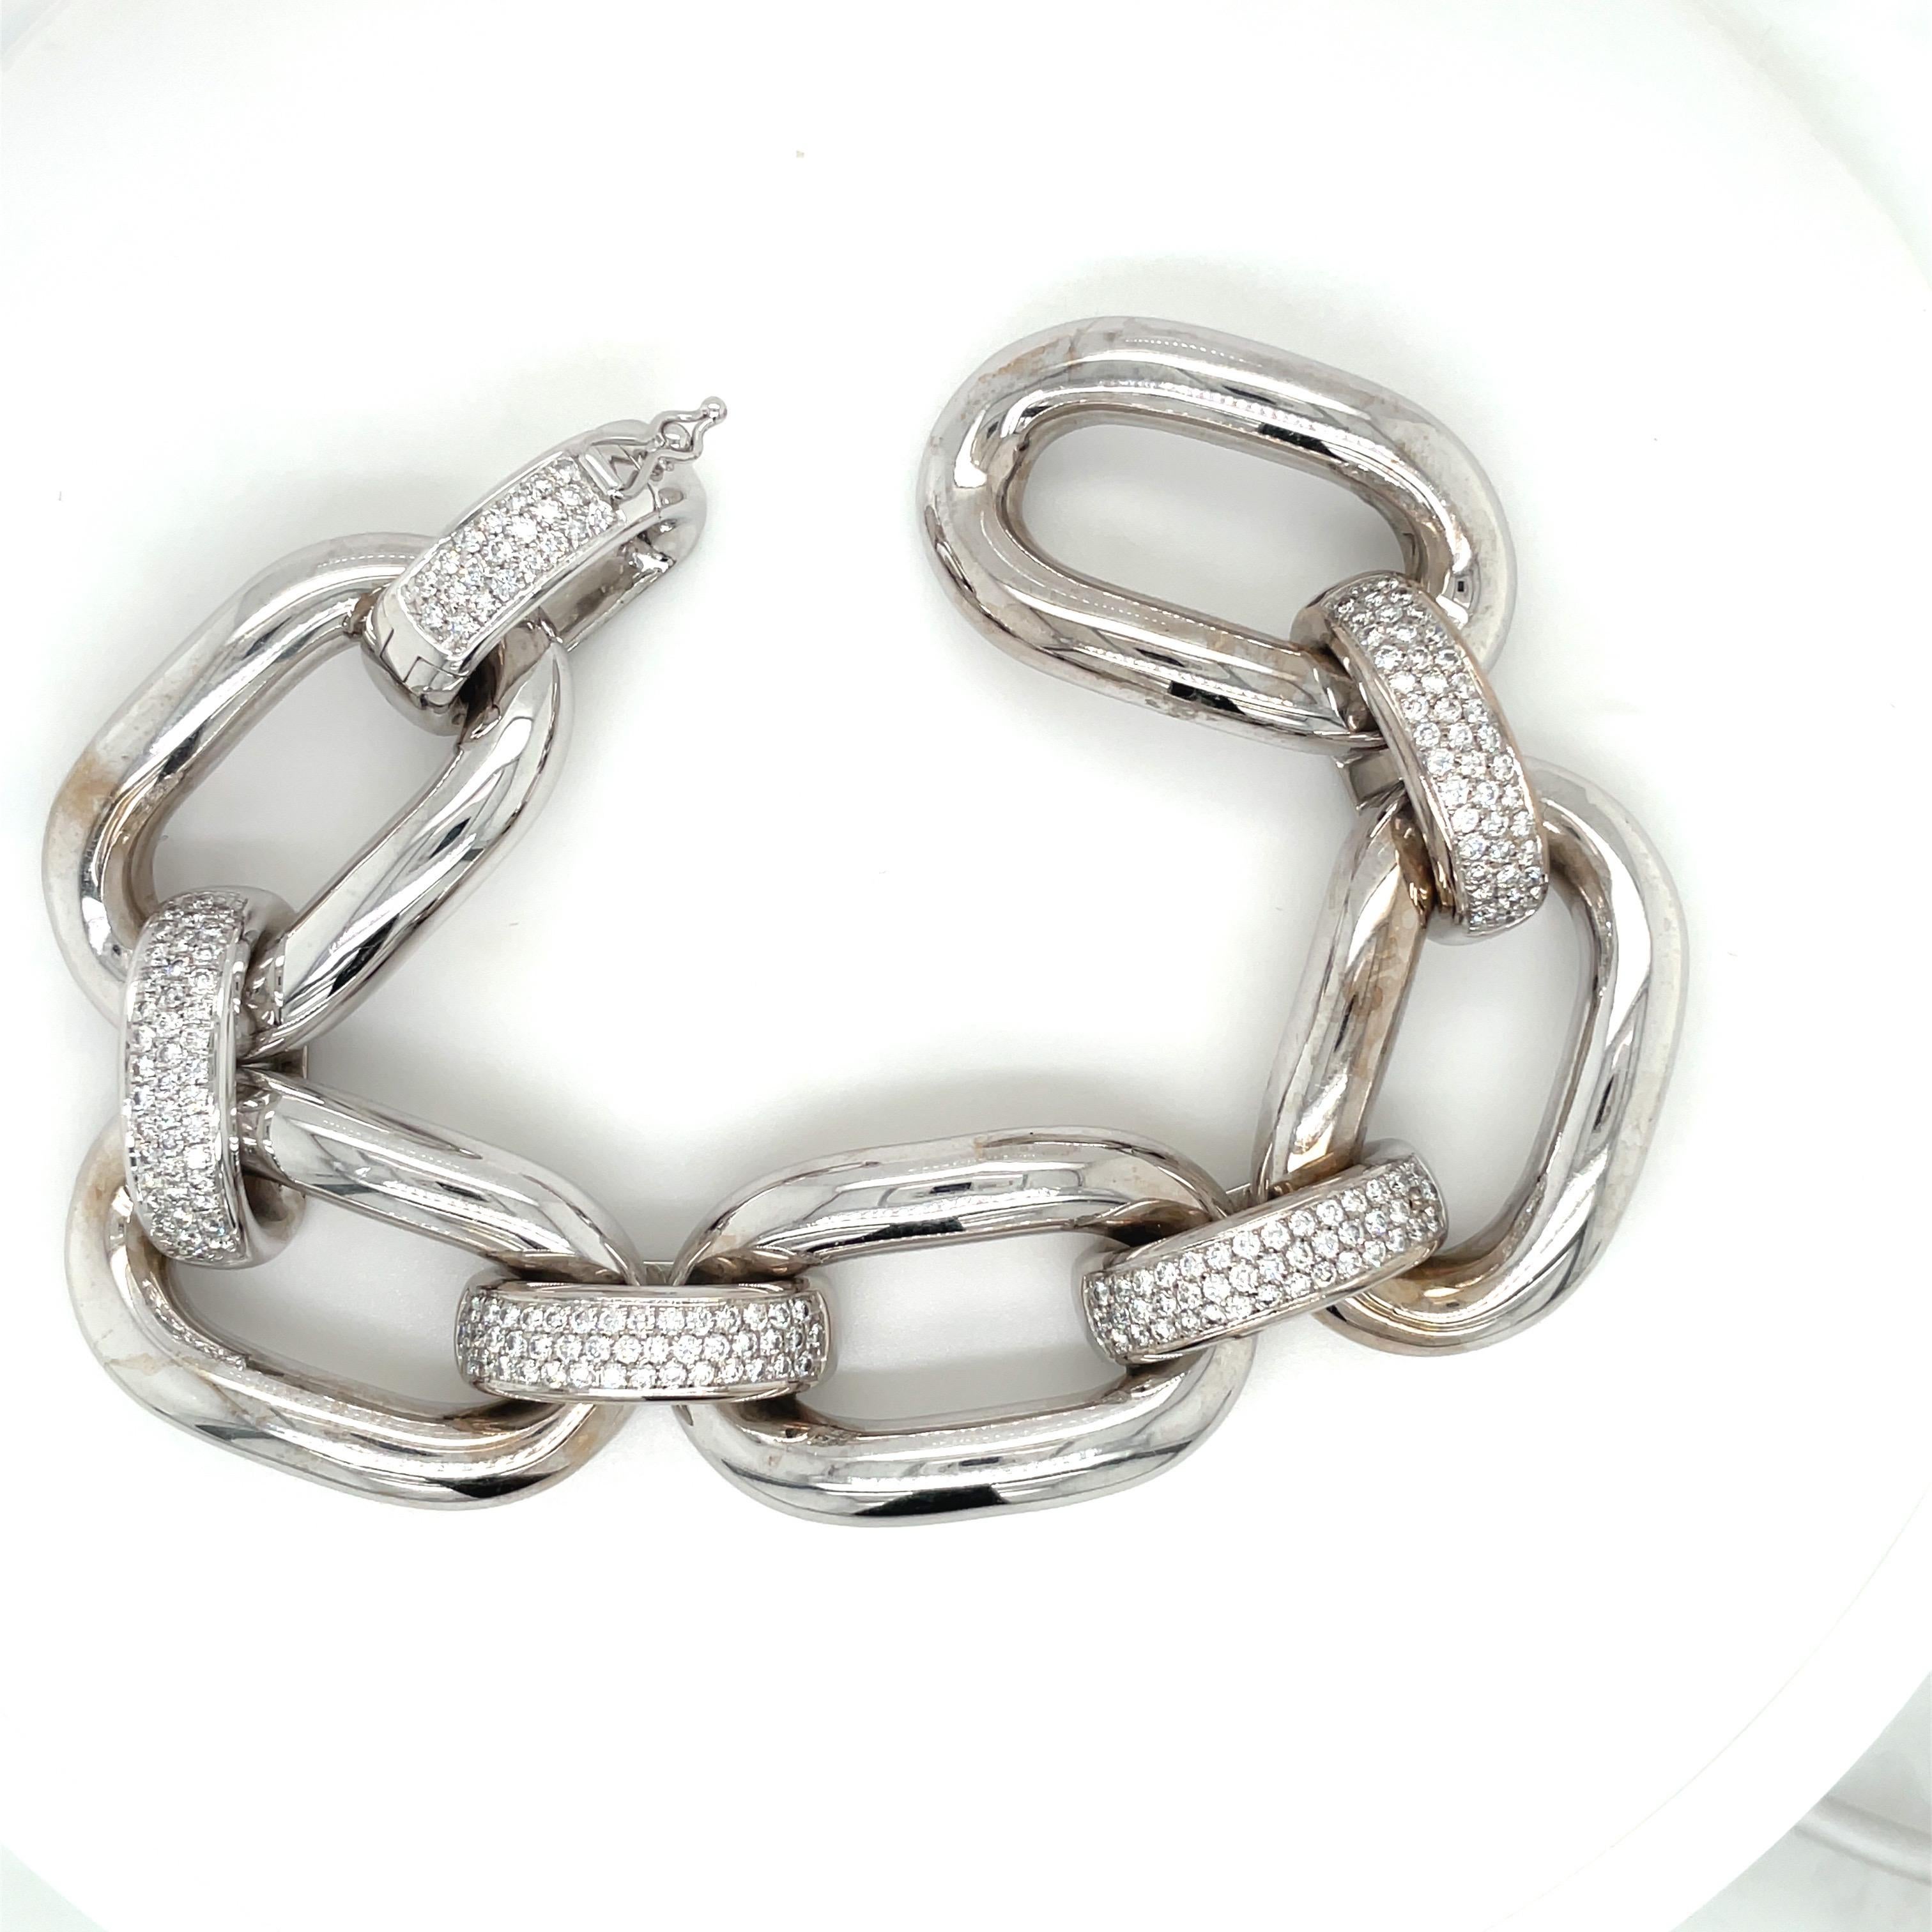 18 karat white gold bracelet designed with 5 oval links and 5 pave diamond connectors. The bracelet is 8